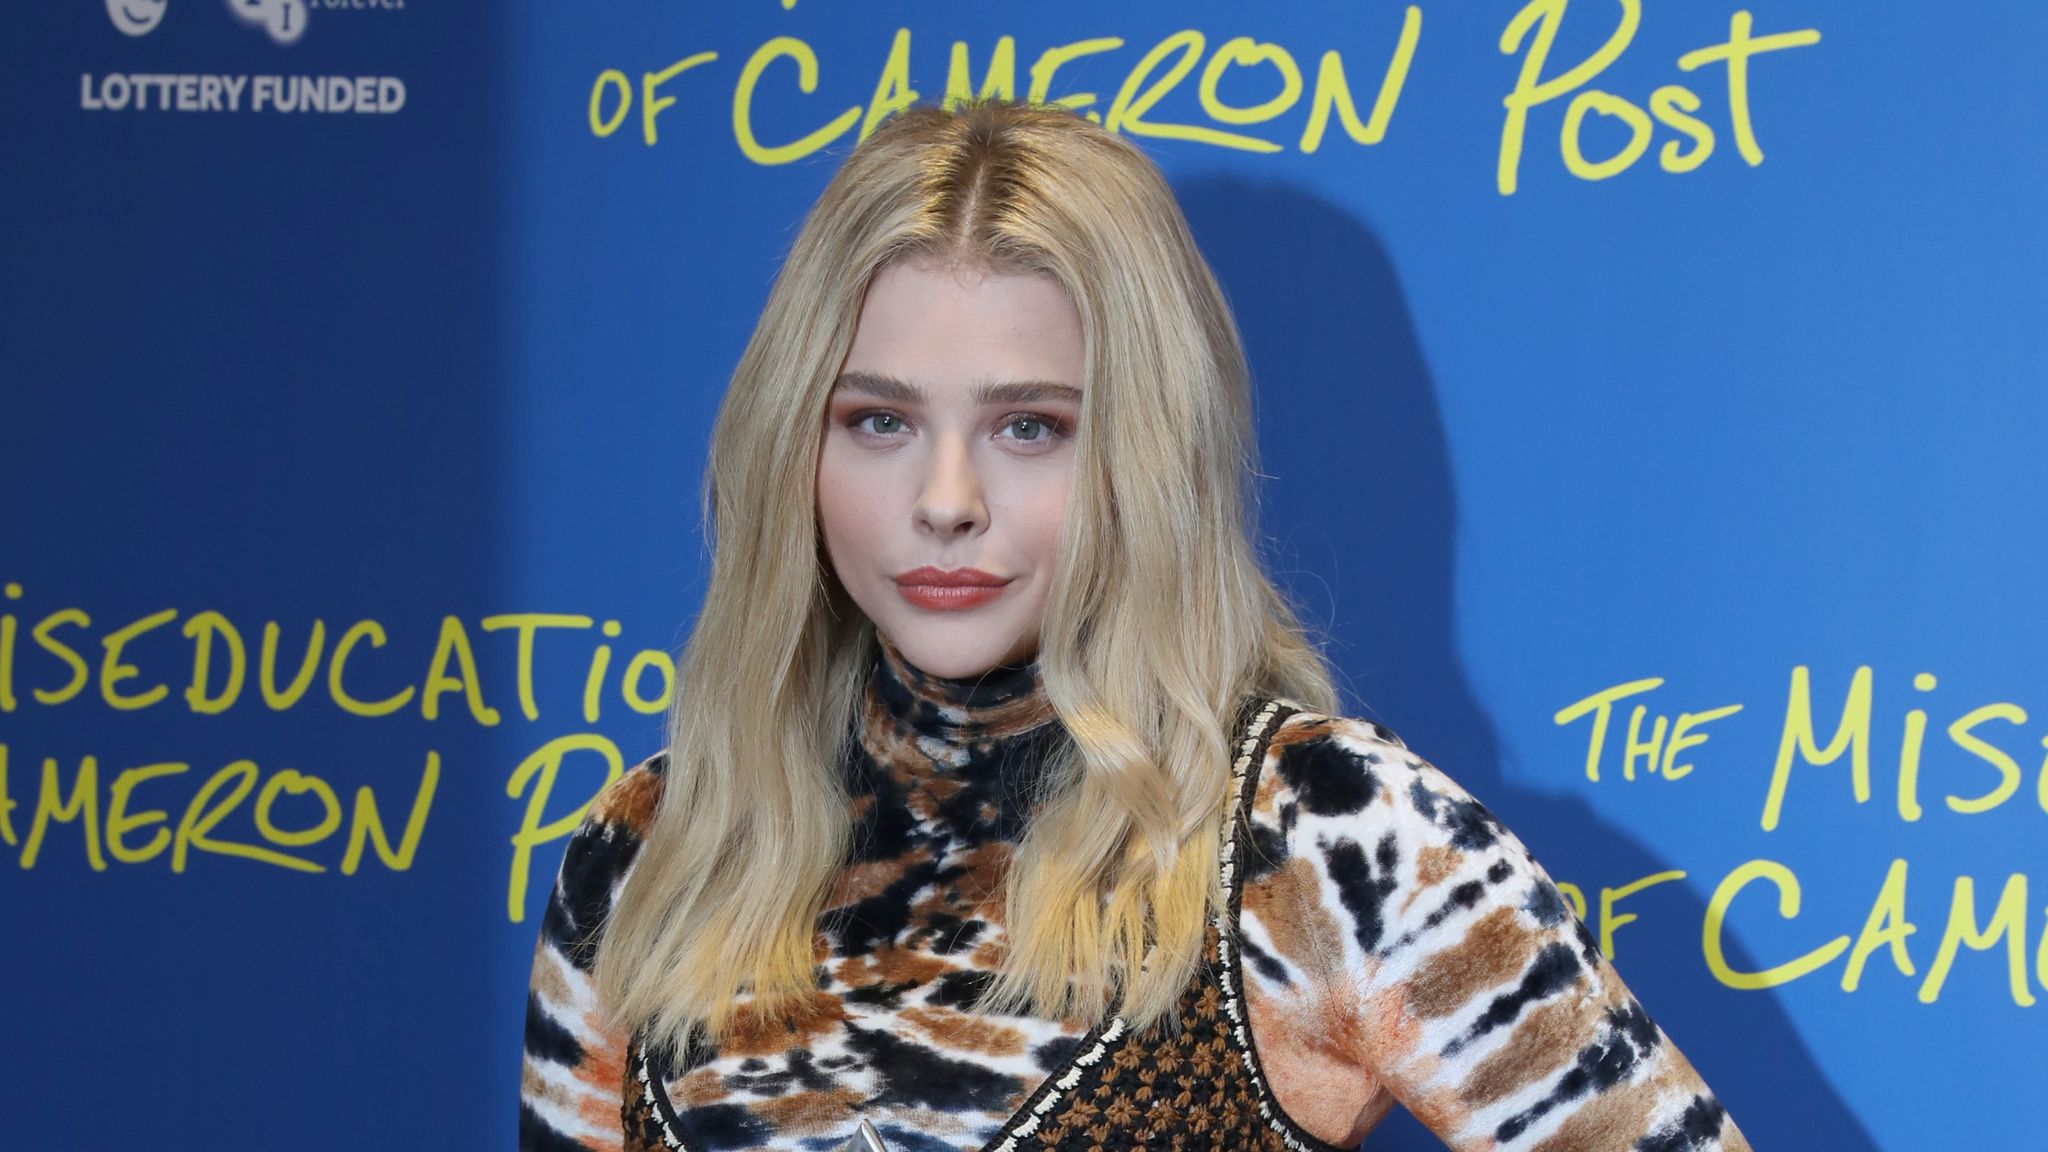 Chloe Grace Moretz is seen wearing a black coat and yellow scarf